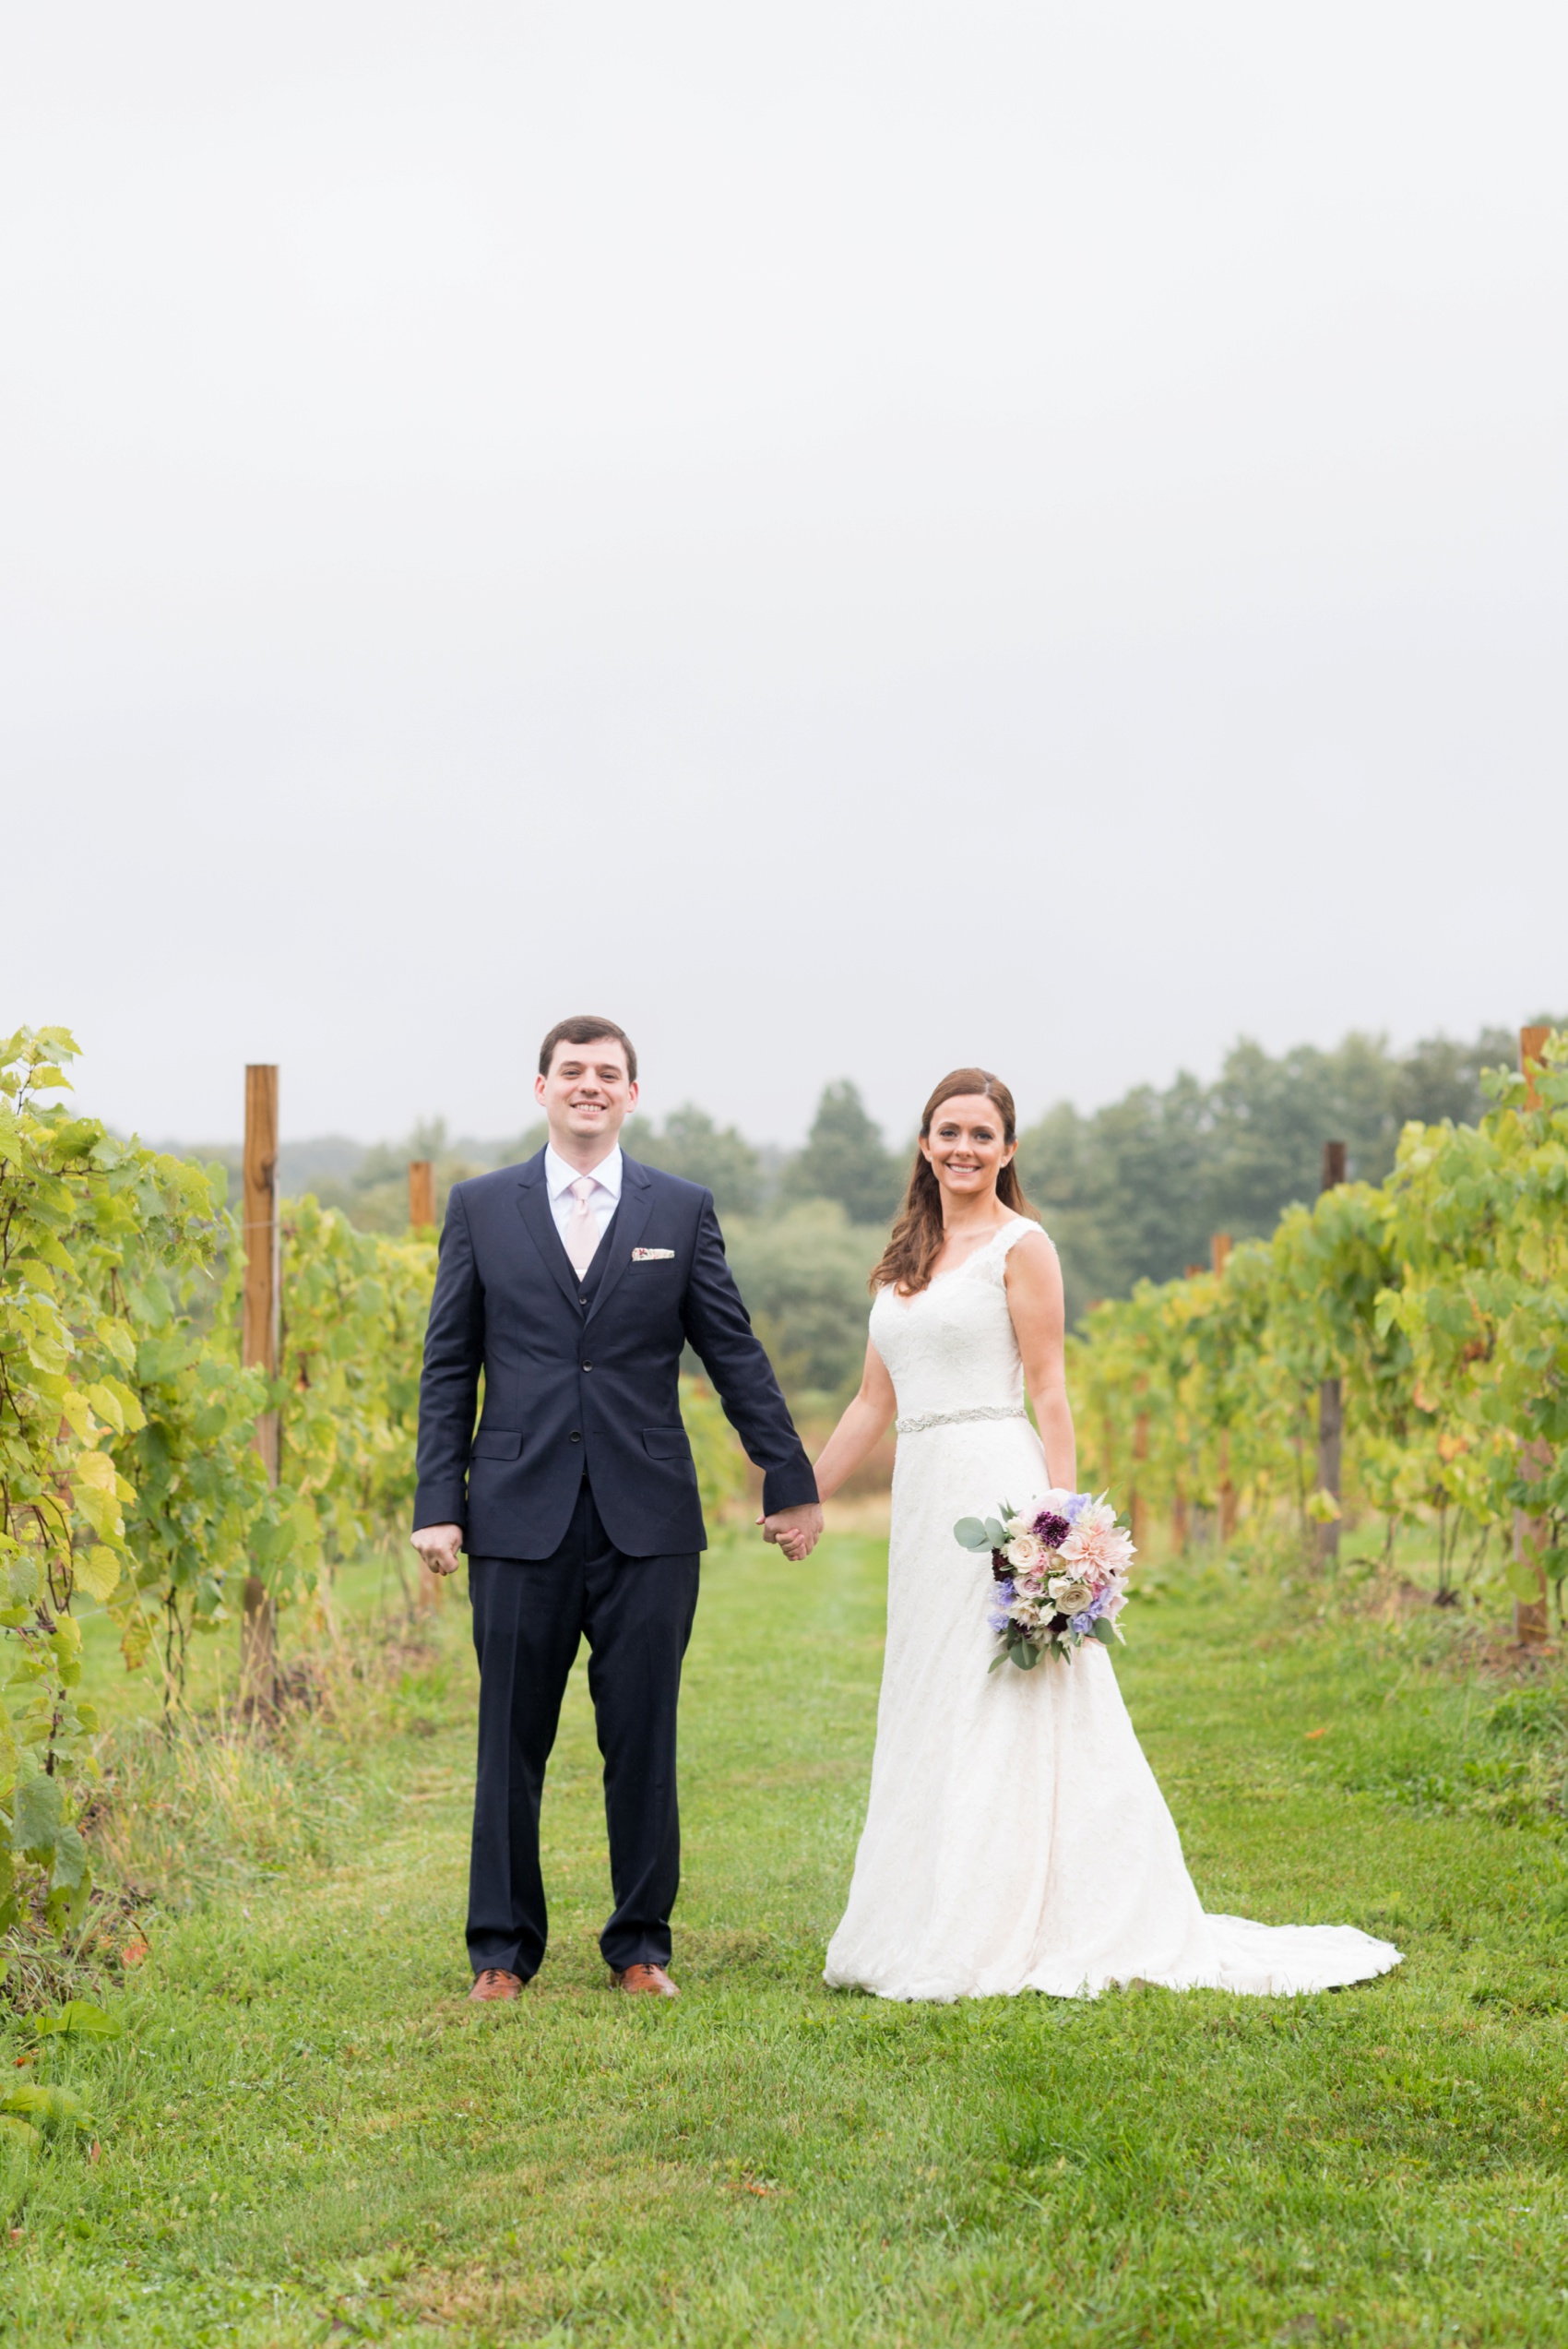 A Red Maple Vineyard wedding. Photo by NYC wedding photographer Mikkel Paige Photography.